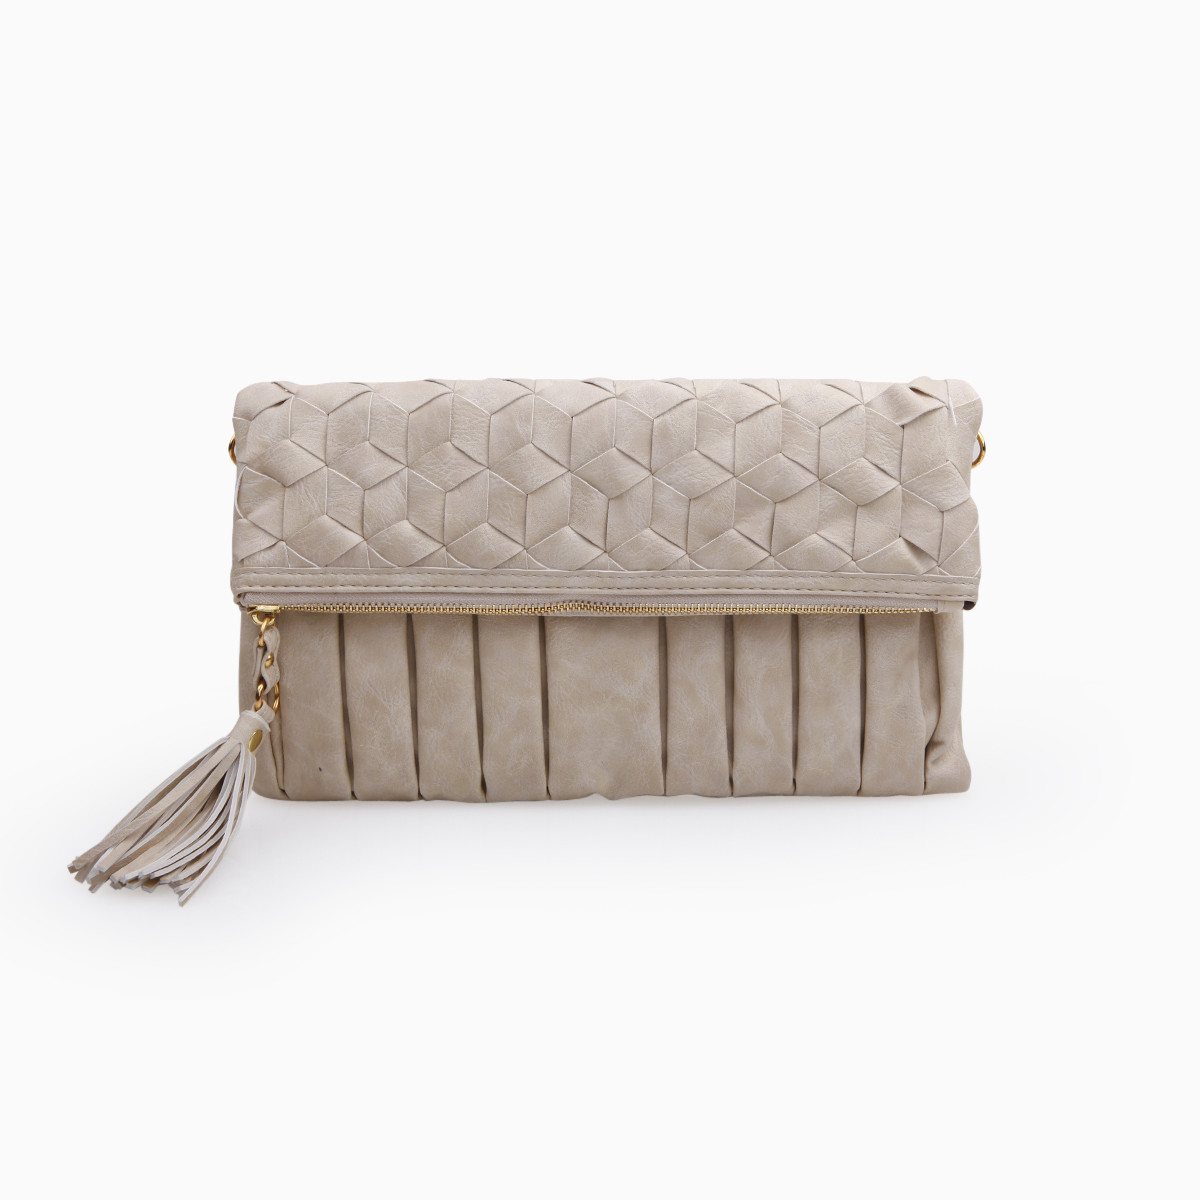 Origami Leatherette Clutch by Urban Expressions